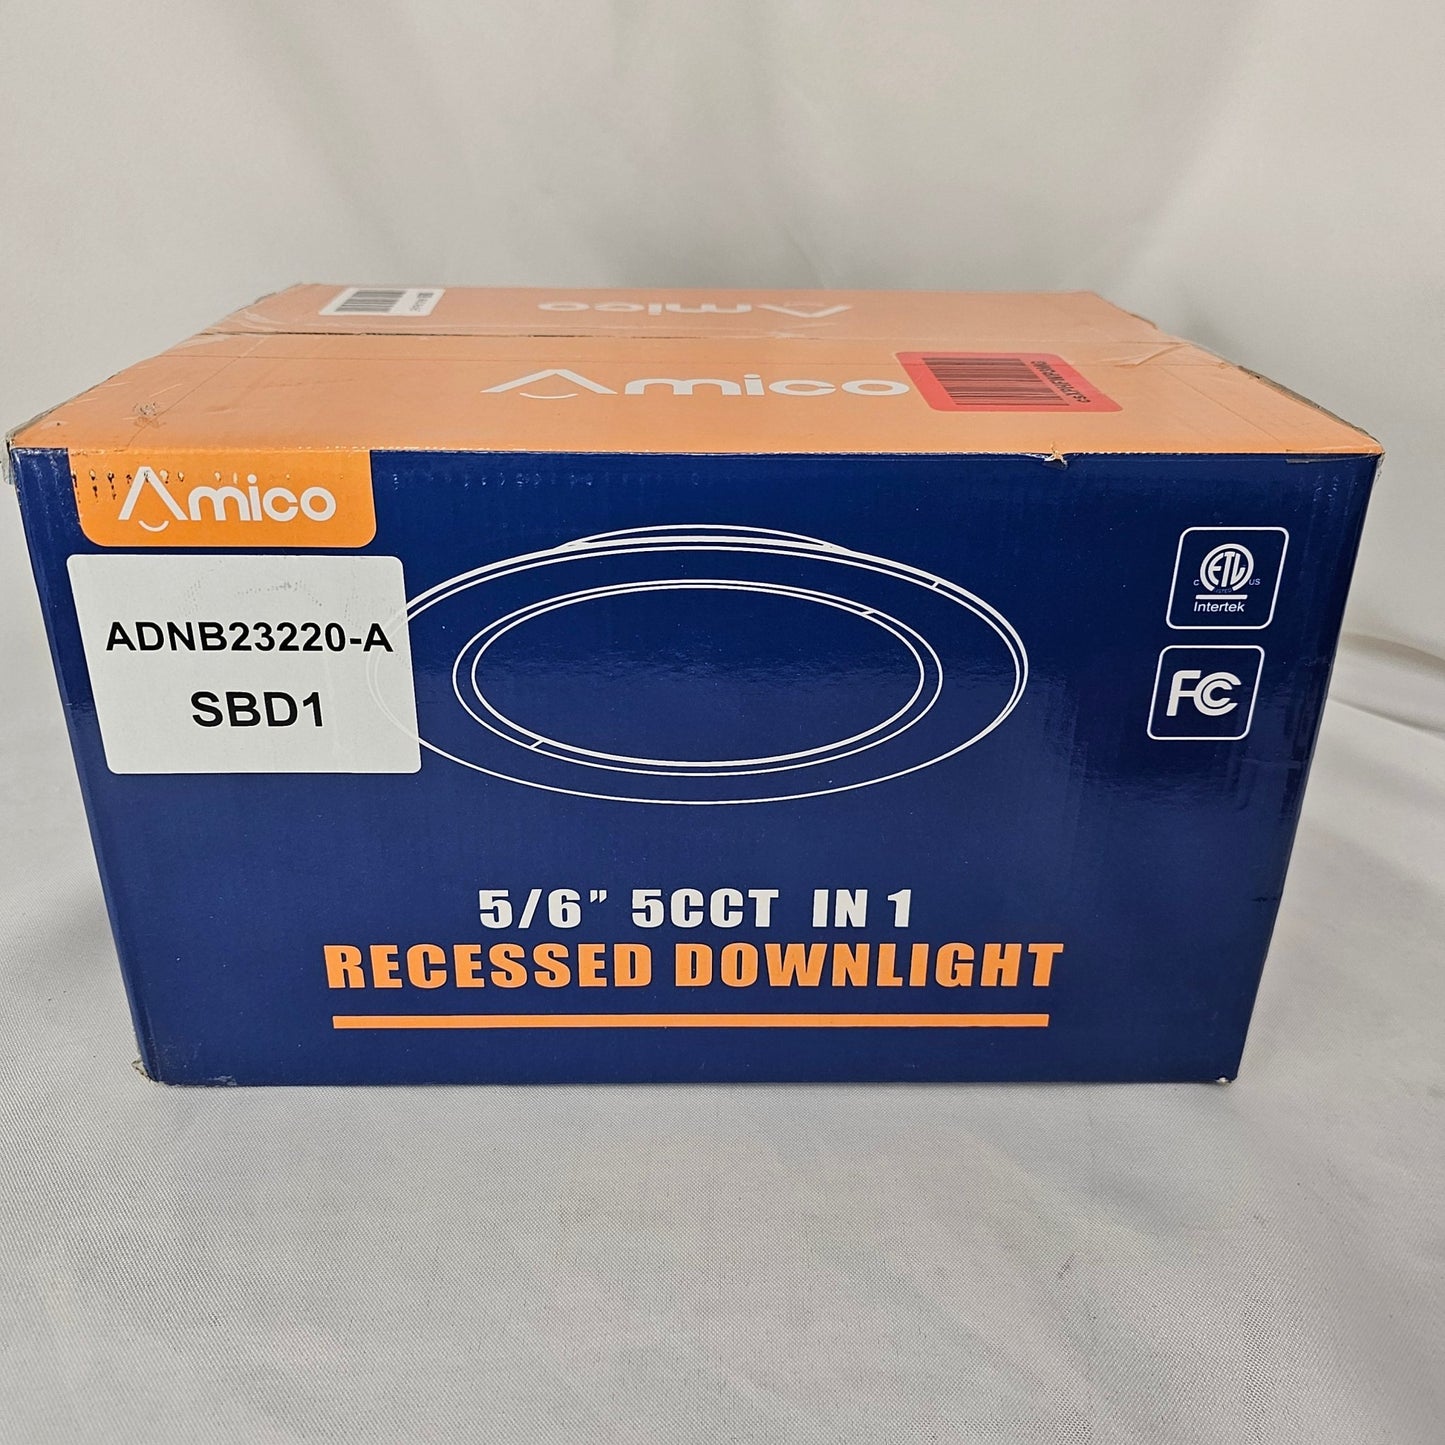 Recessed Downlight 5/6 Inch 5CCT In 1 Amico ADNB23220-A - DQ Distribution